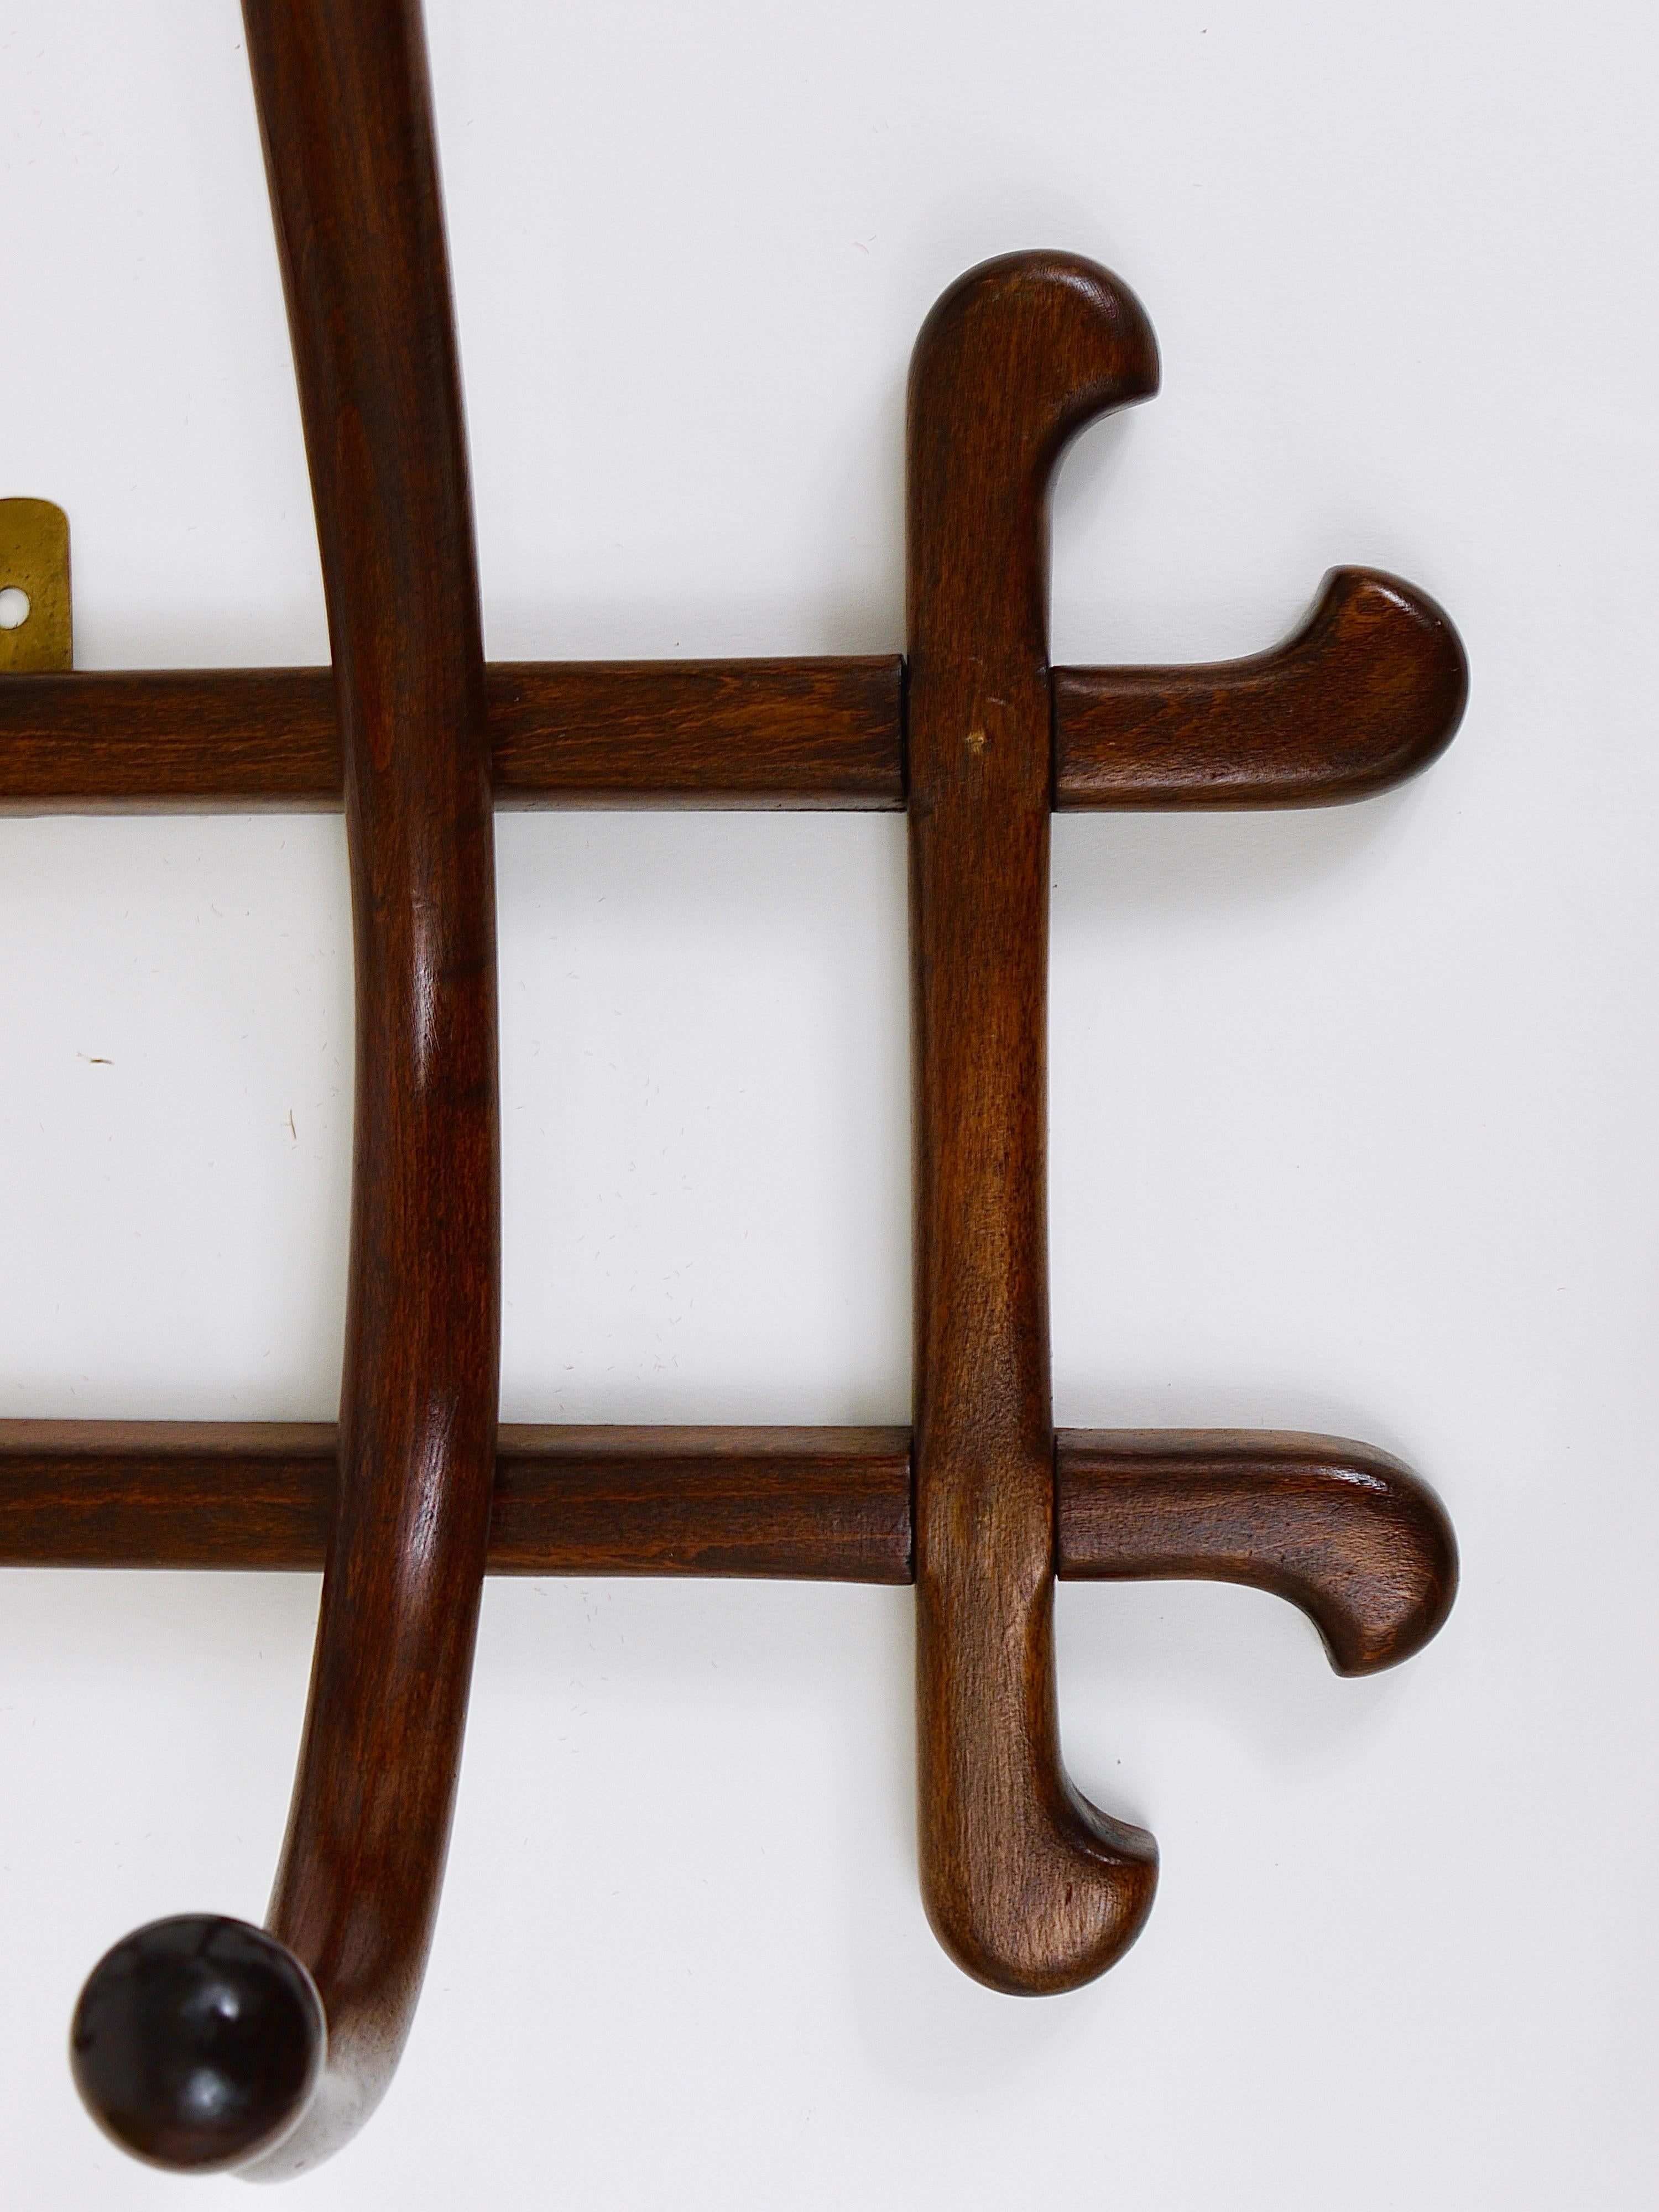 1900s Thonet Art Nouveau Secession Bentwood Wall Coat Rack with four Hangers 8